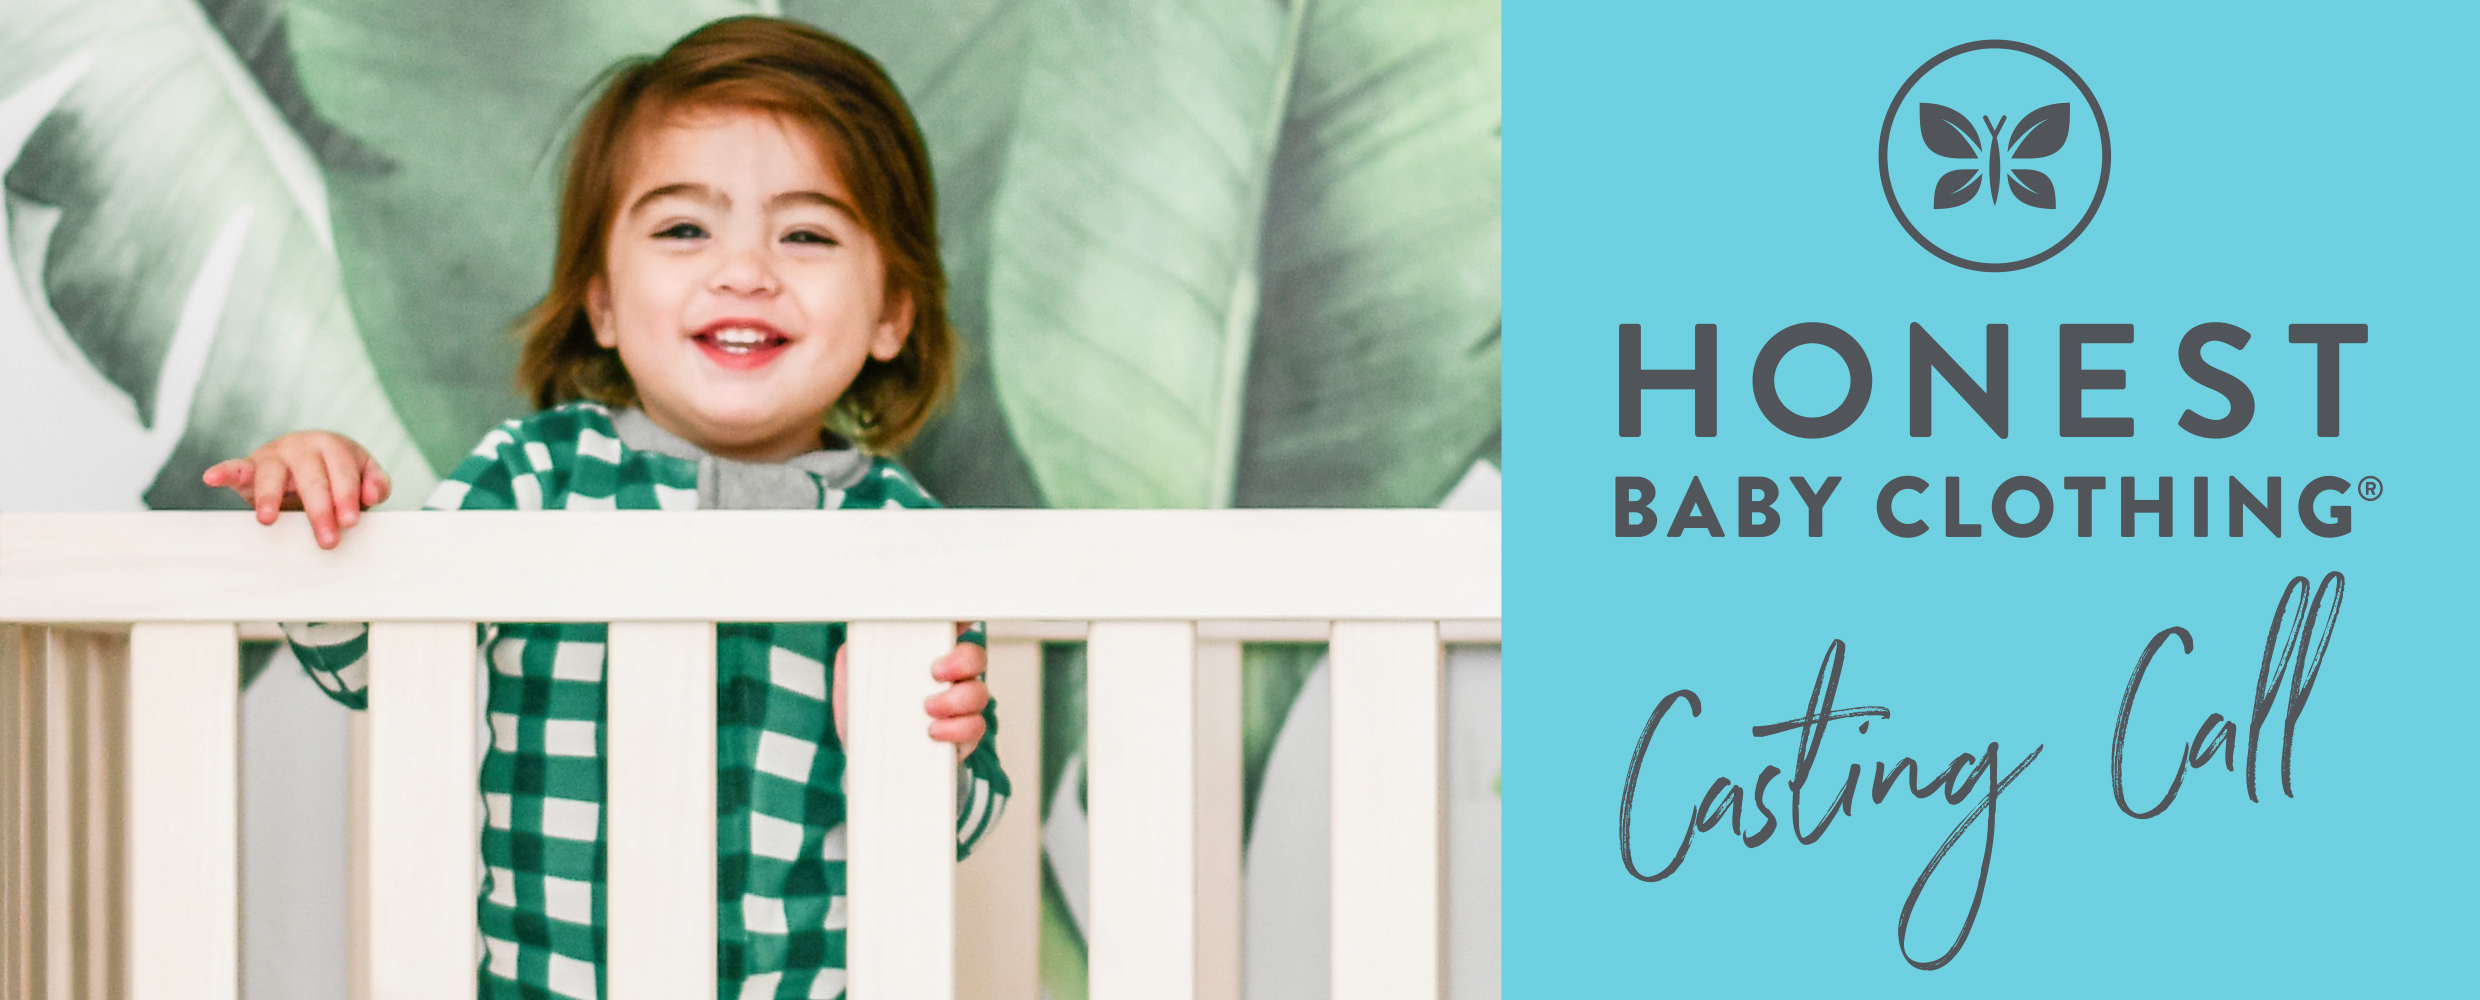 Honest Baby Clothing Casting Call Landing Page